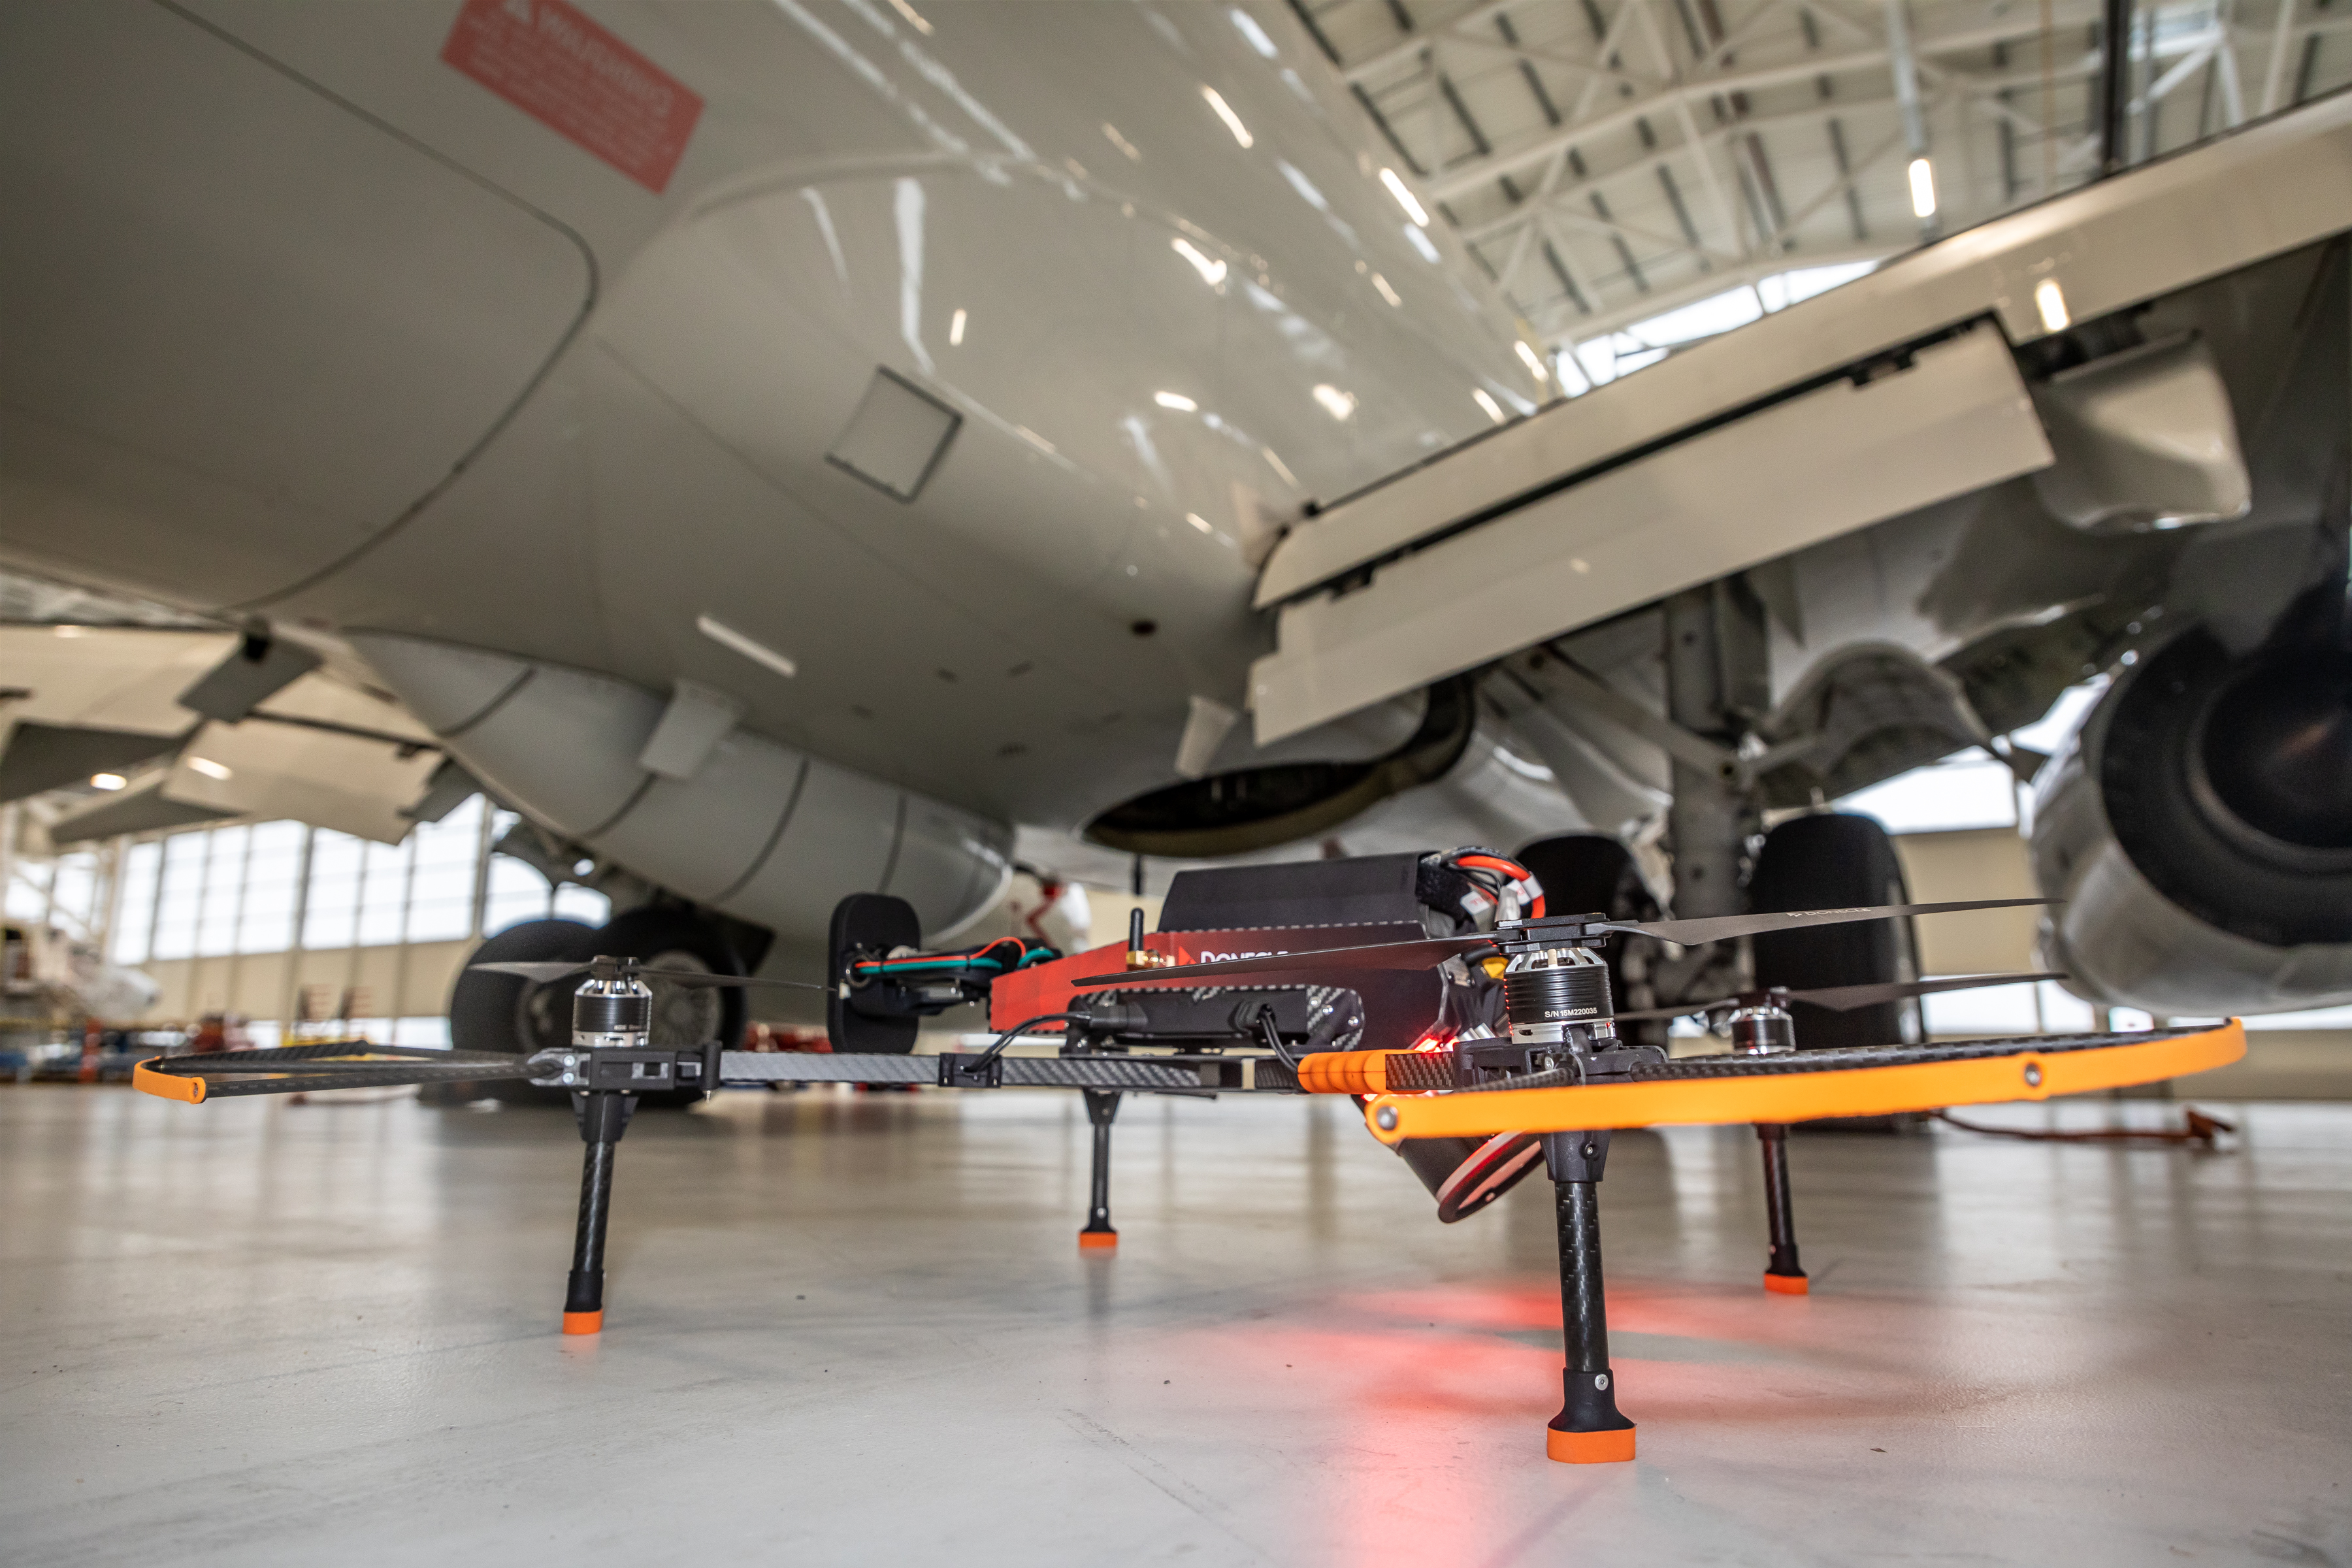 Picture shows a drone on the floor of a hangar in front of an aircraft